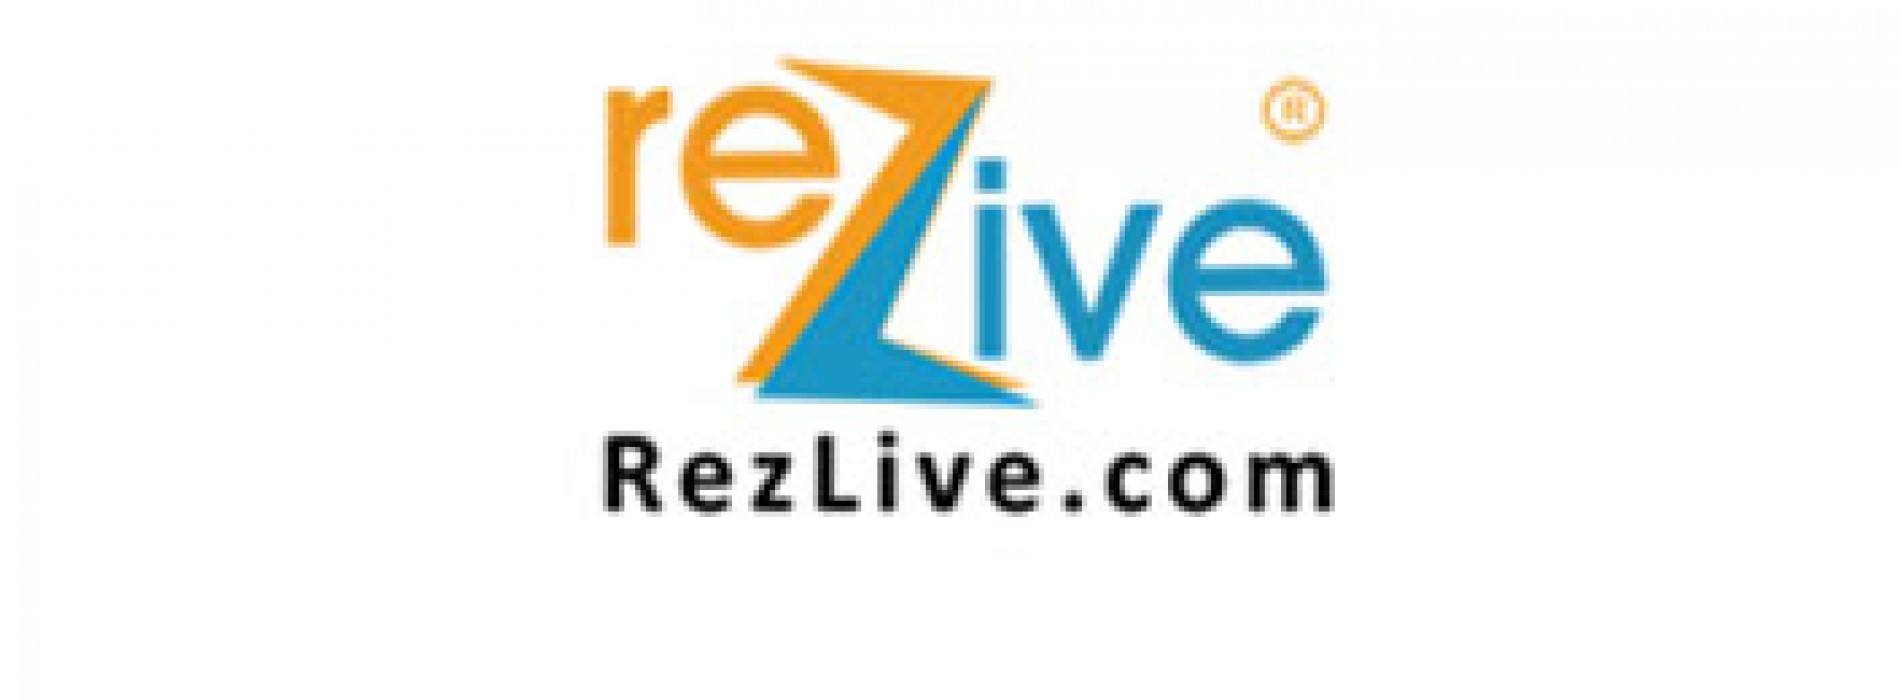 RezLive.com, the global B2B travel wholesaler, has anticipated growth in excess of 40 per cent on its Global Sales for the fiscal year 2015